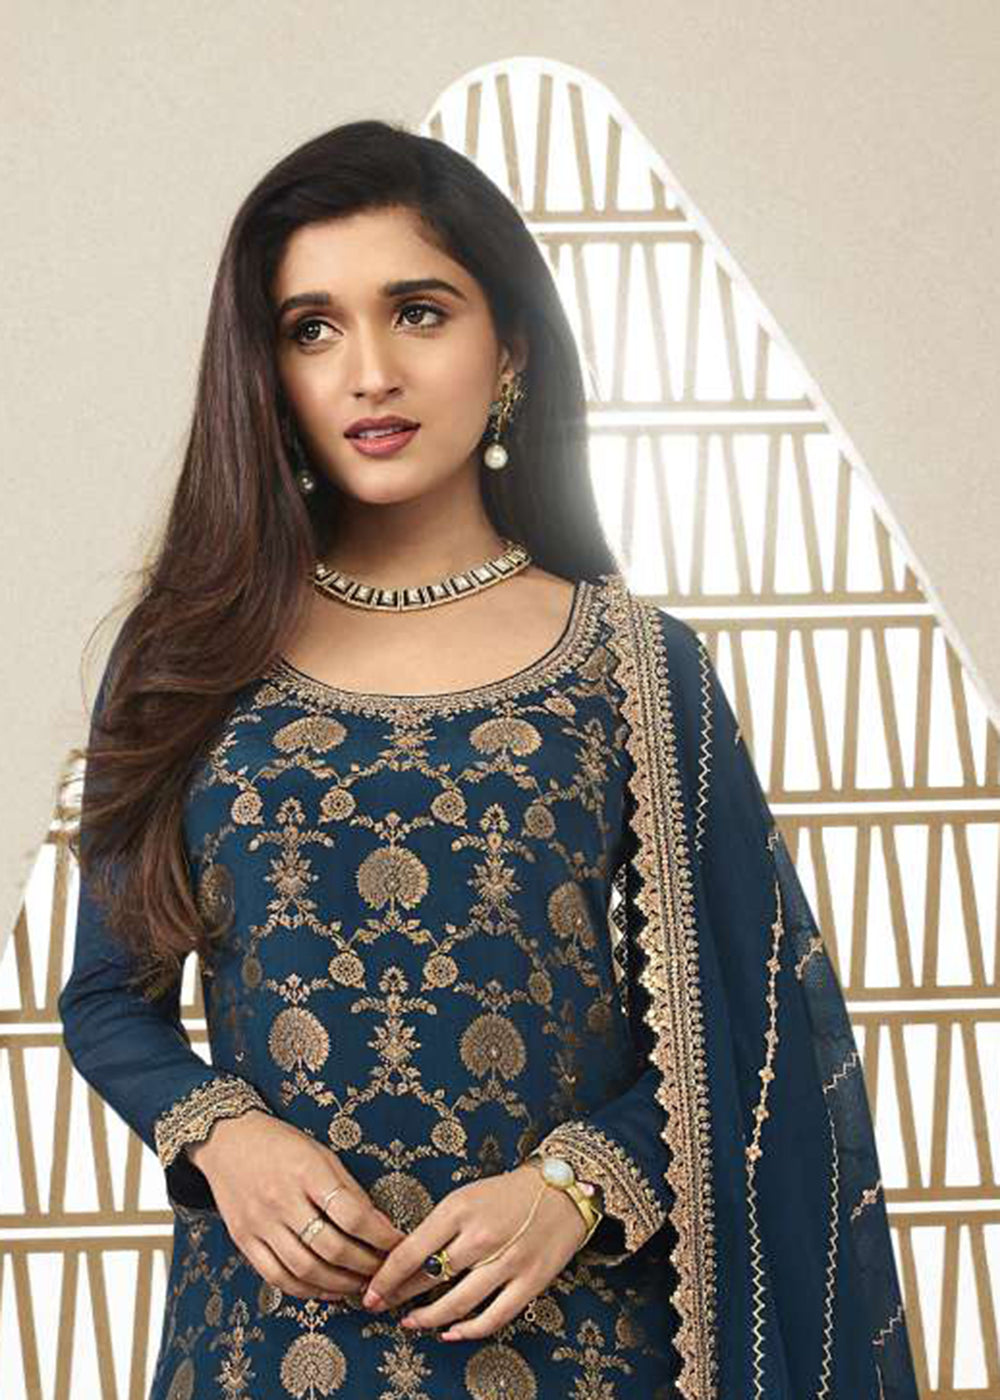 Buy Now Chinnon Jacquard Prussian Blue Zari Embroidered Palazzo Suit Online in USA, UK, Canada, Germany, Australia & Worldwide at Empress Clothing. 